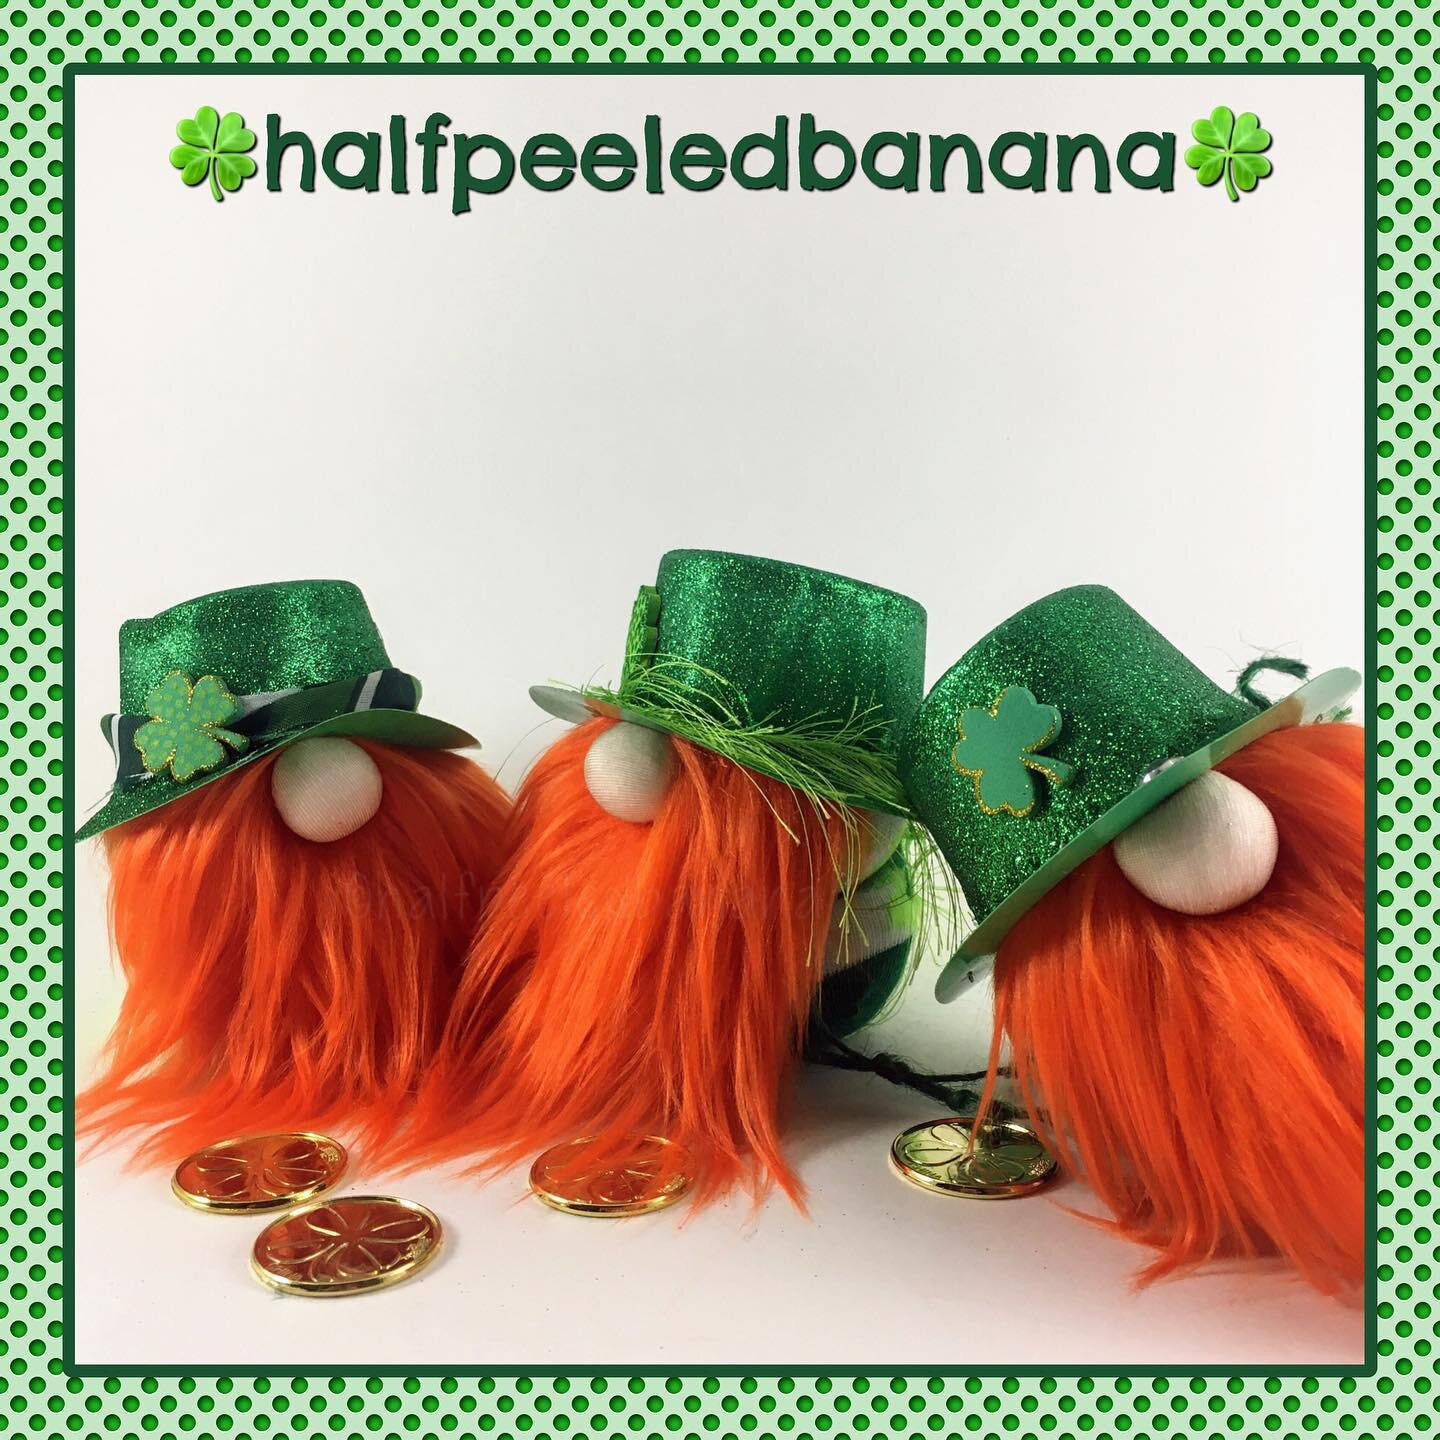 ☘️ Want to know how to catch a Leprechaun? It&rsquo;s easy... make your own!! I&rsquo;ll teach you how!
☘️
Join #halfpeeledbanana on March 7 from 2:30-4:30 at  @thepaintedestate for a Build Your Own Leprechaun workshop! Prepare to pull your socks up,